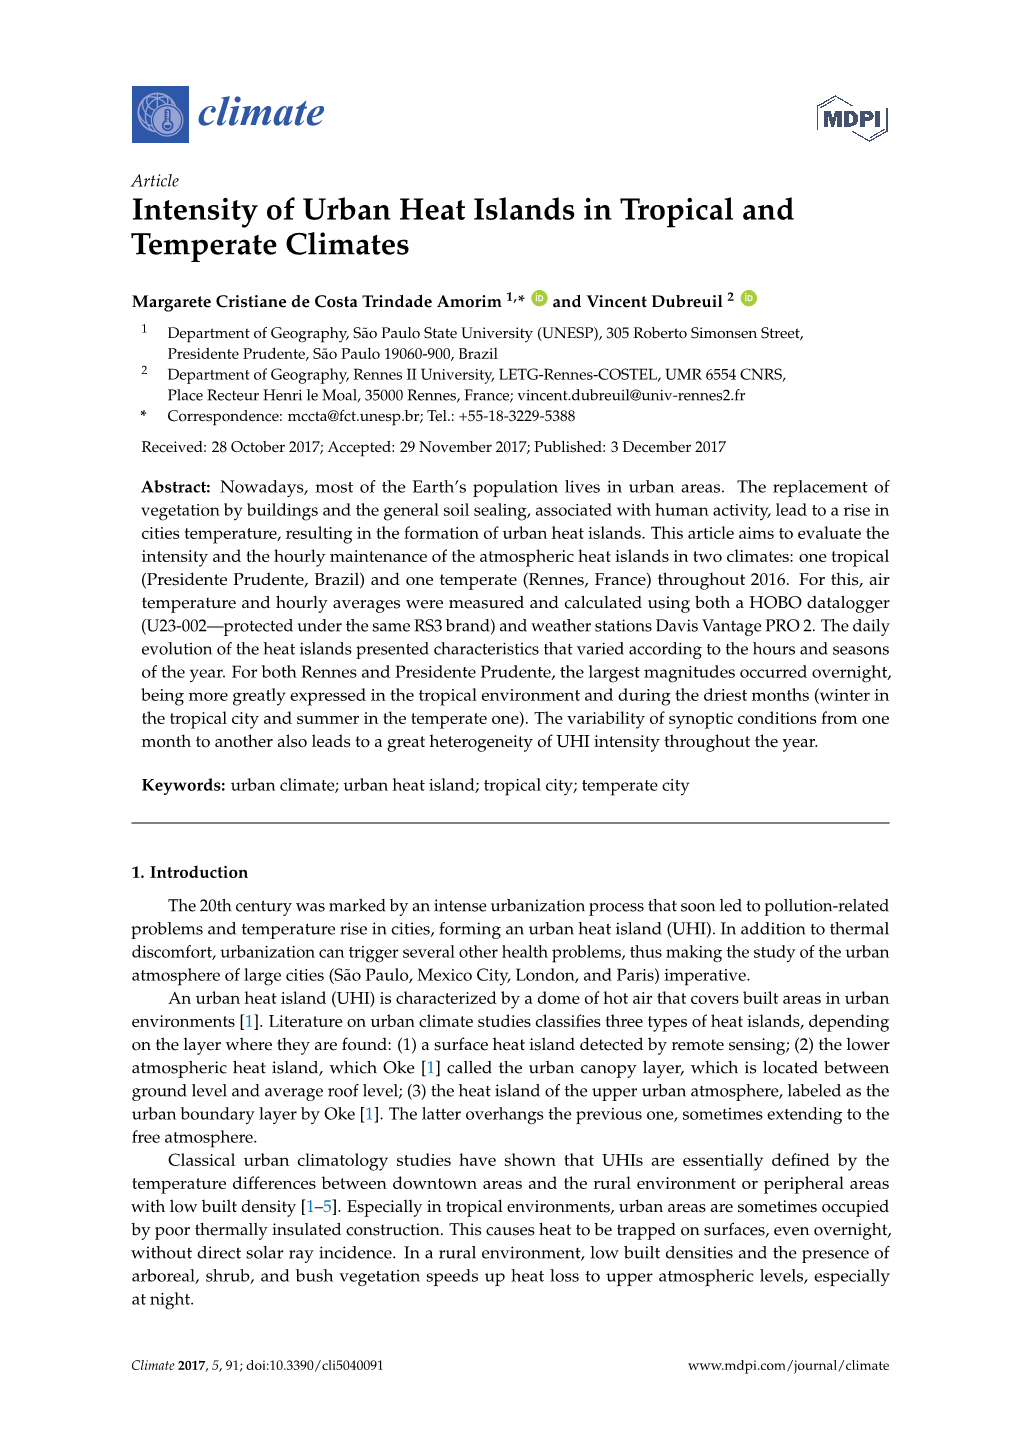 Intensity of Urban Heat Islands in Tropical and Temperate Climates